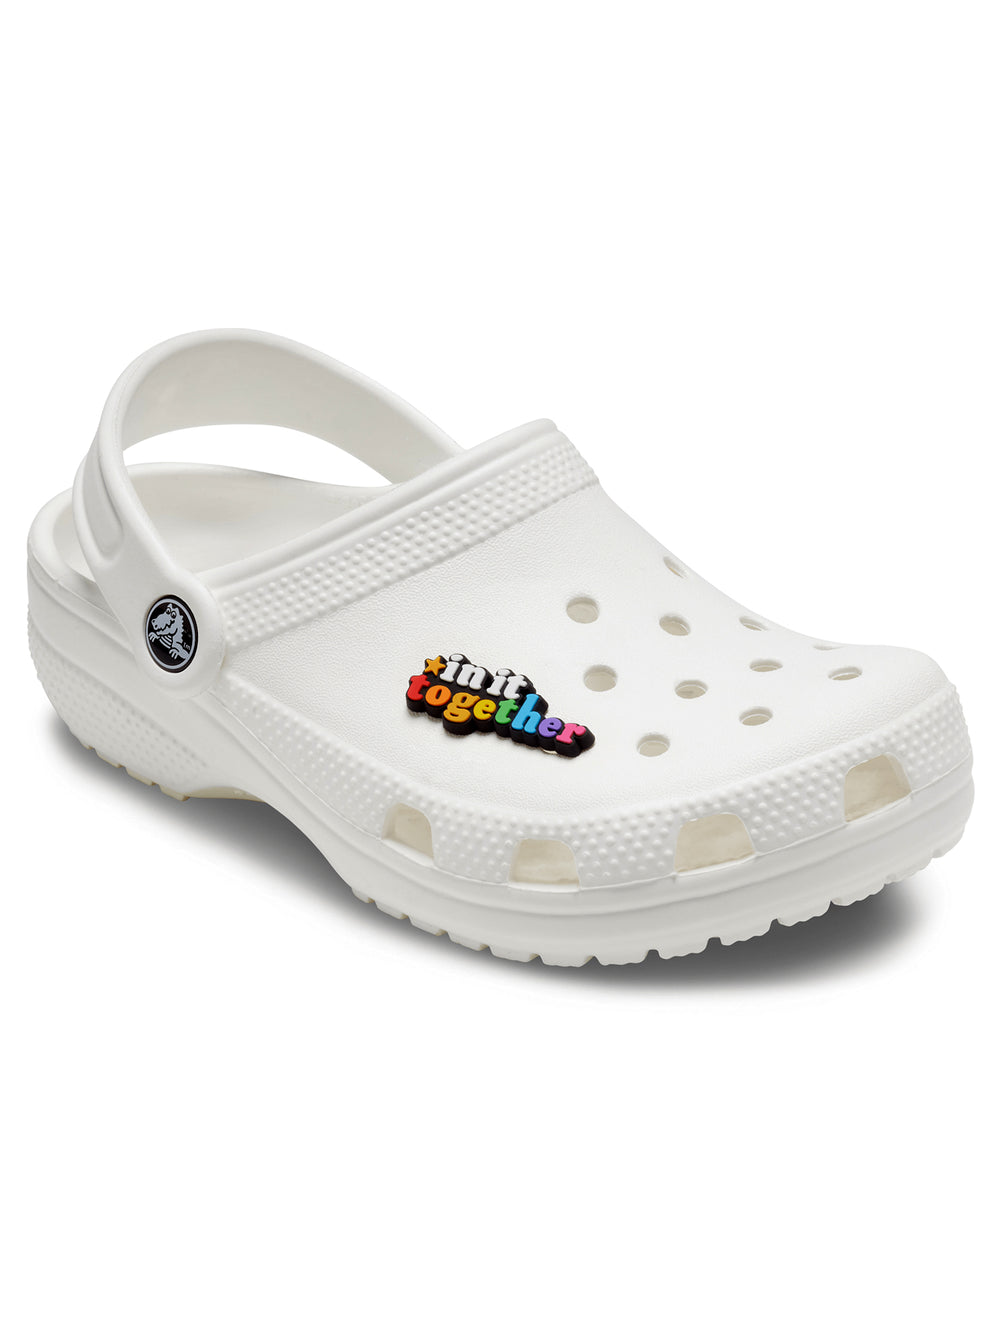 CROCS IN IT TOGETHER - RAINBOW - CLEARANCE